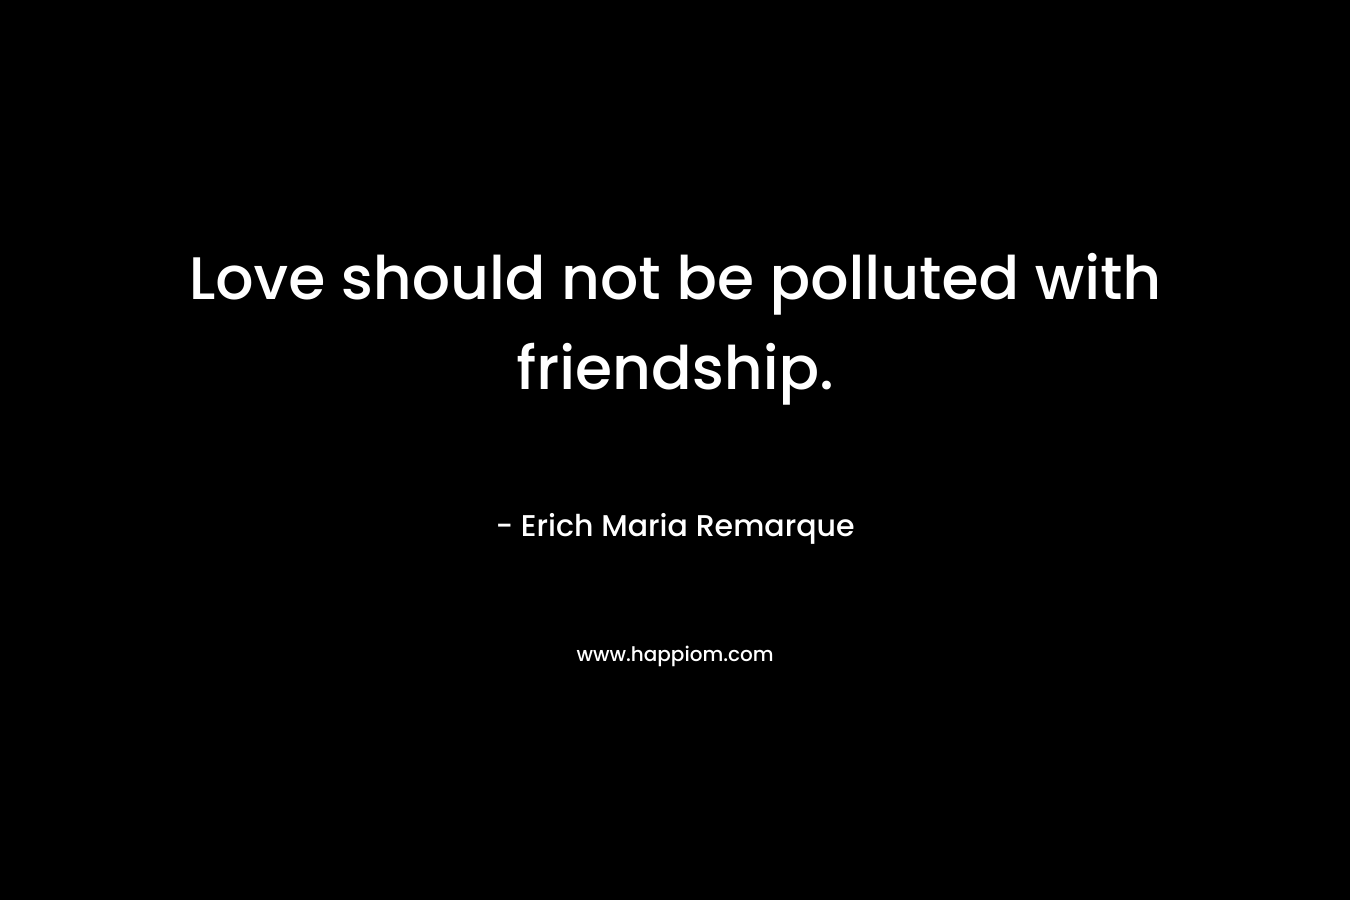 Love should not be polluted with friendship. – Erich Maria Remarque